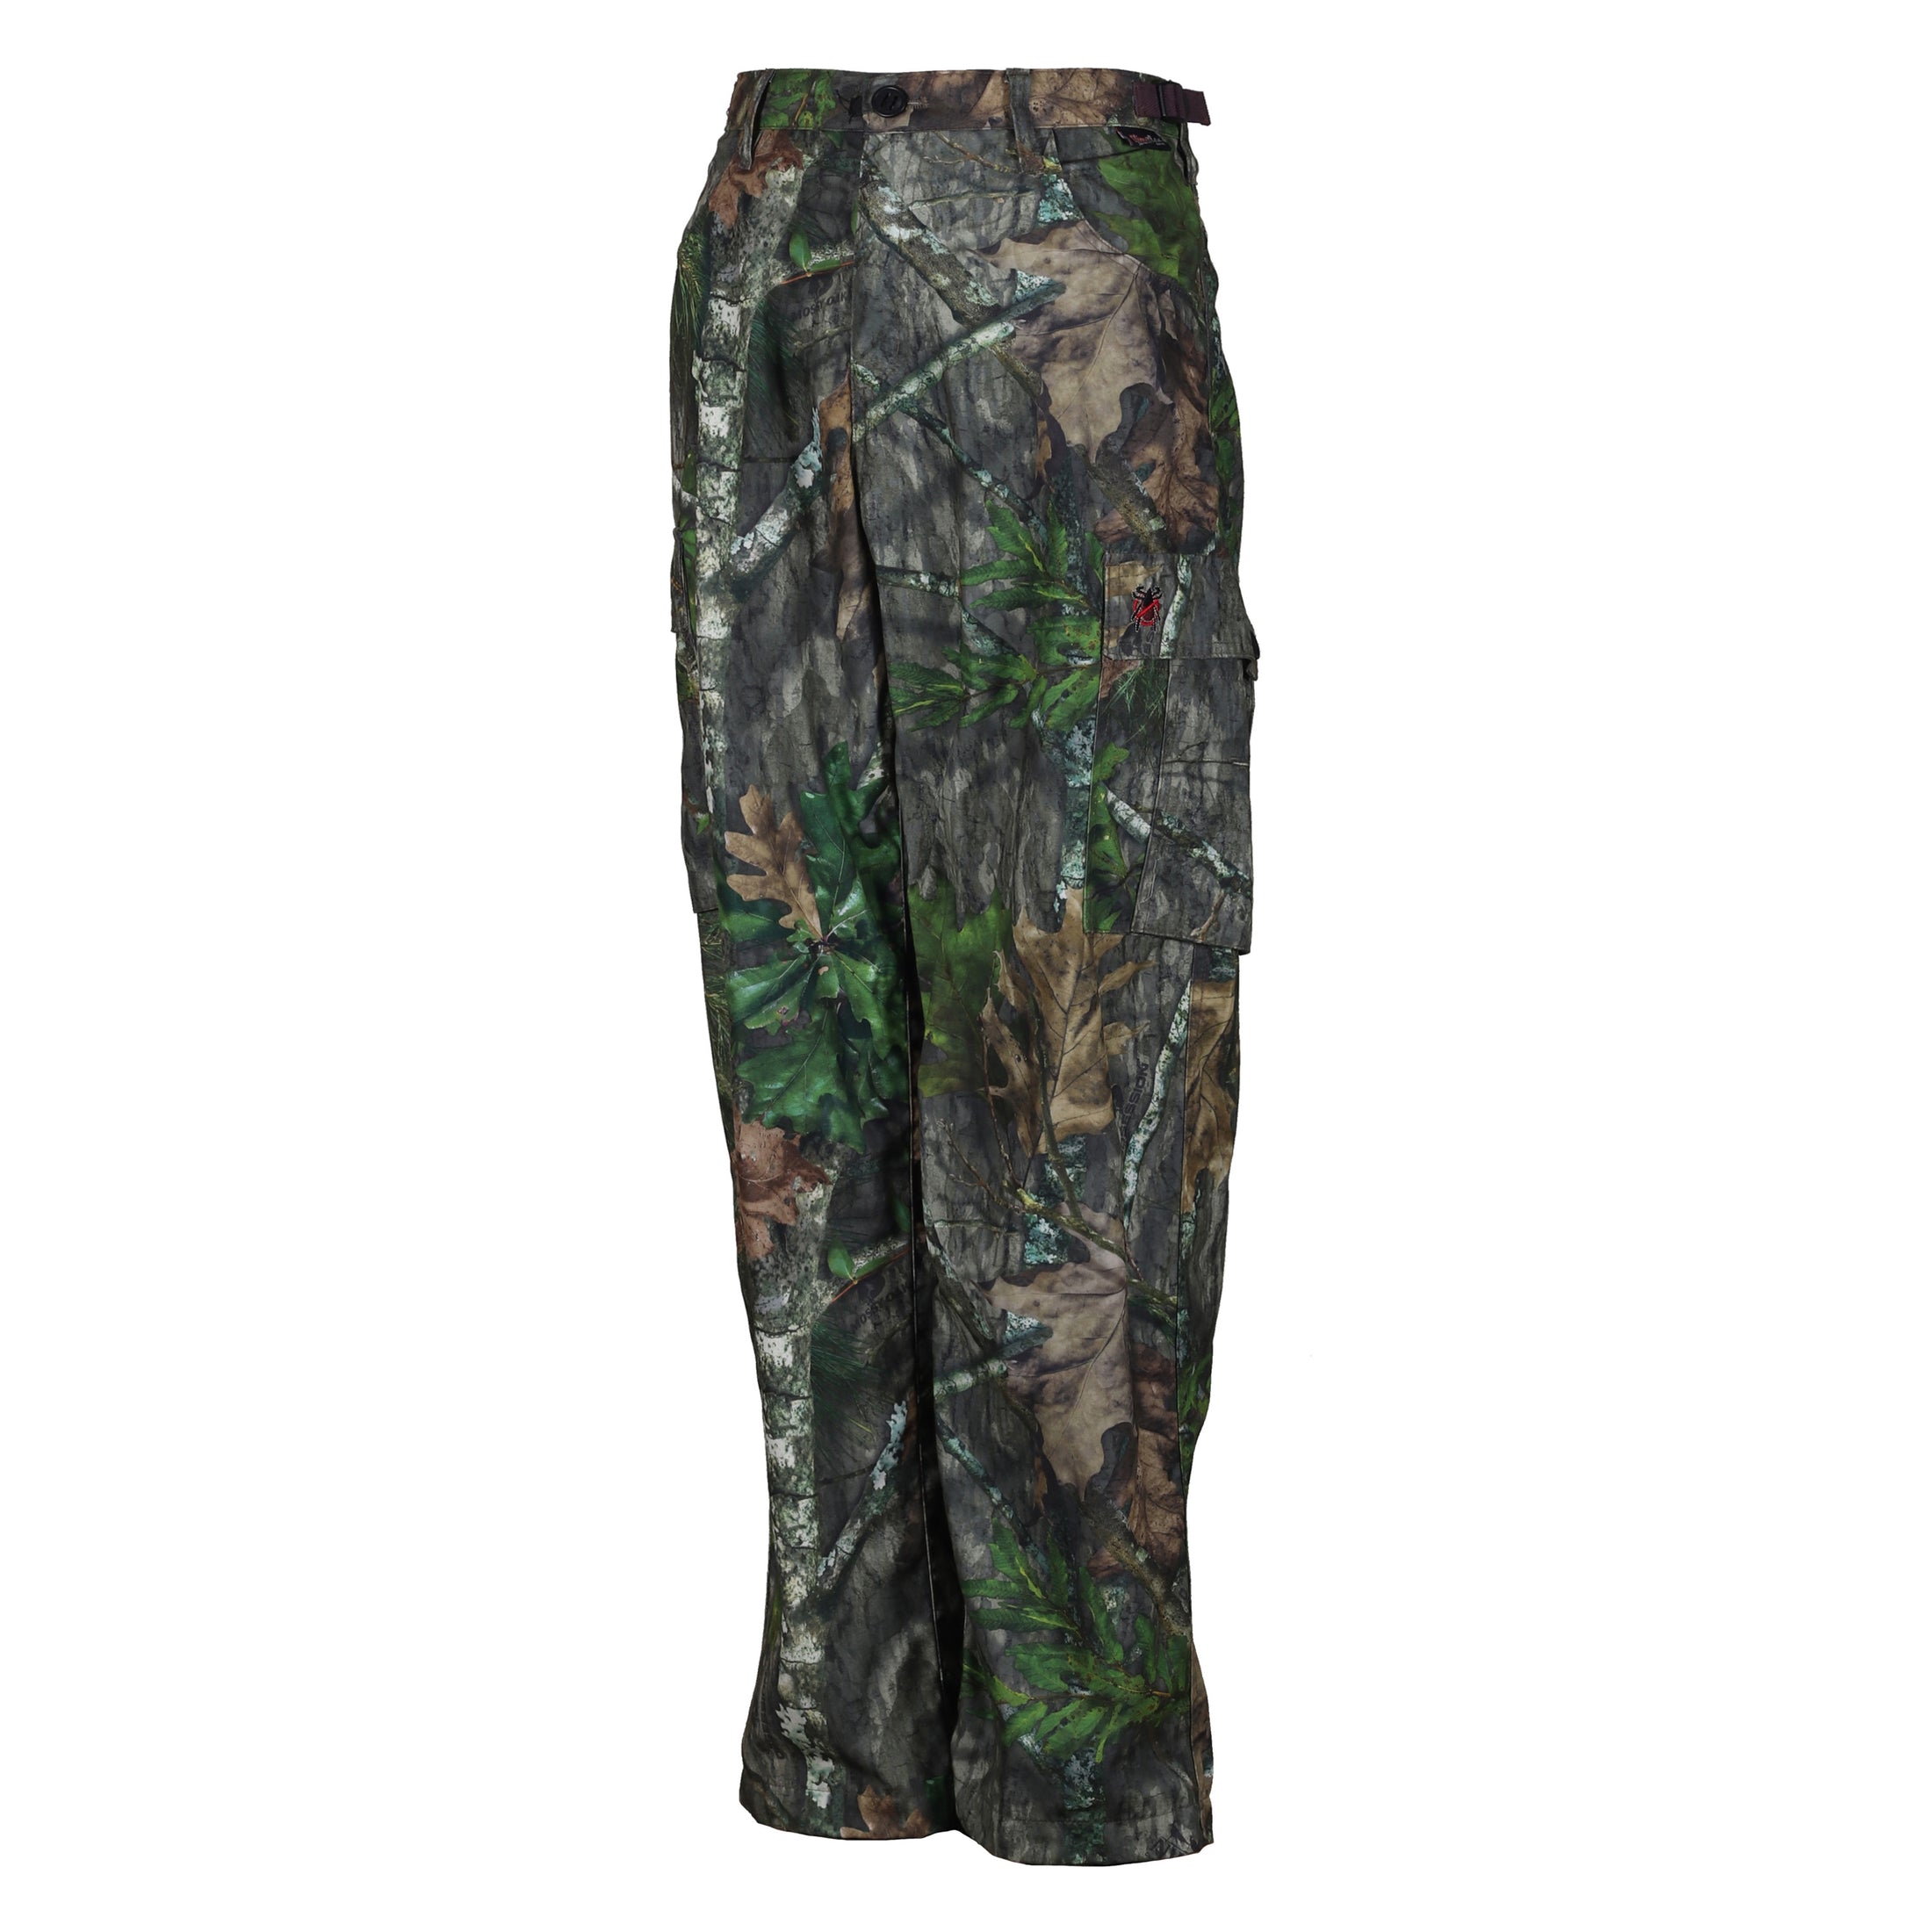 gamehide ElimiTick Insect Repellent Five Pocket Pant front (mossy oak obsession)